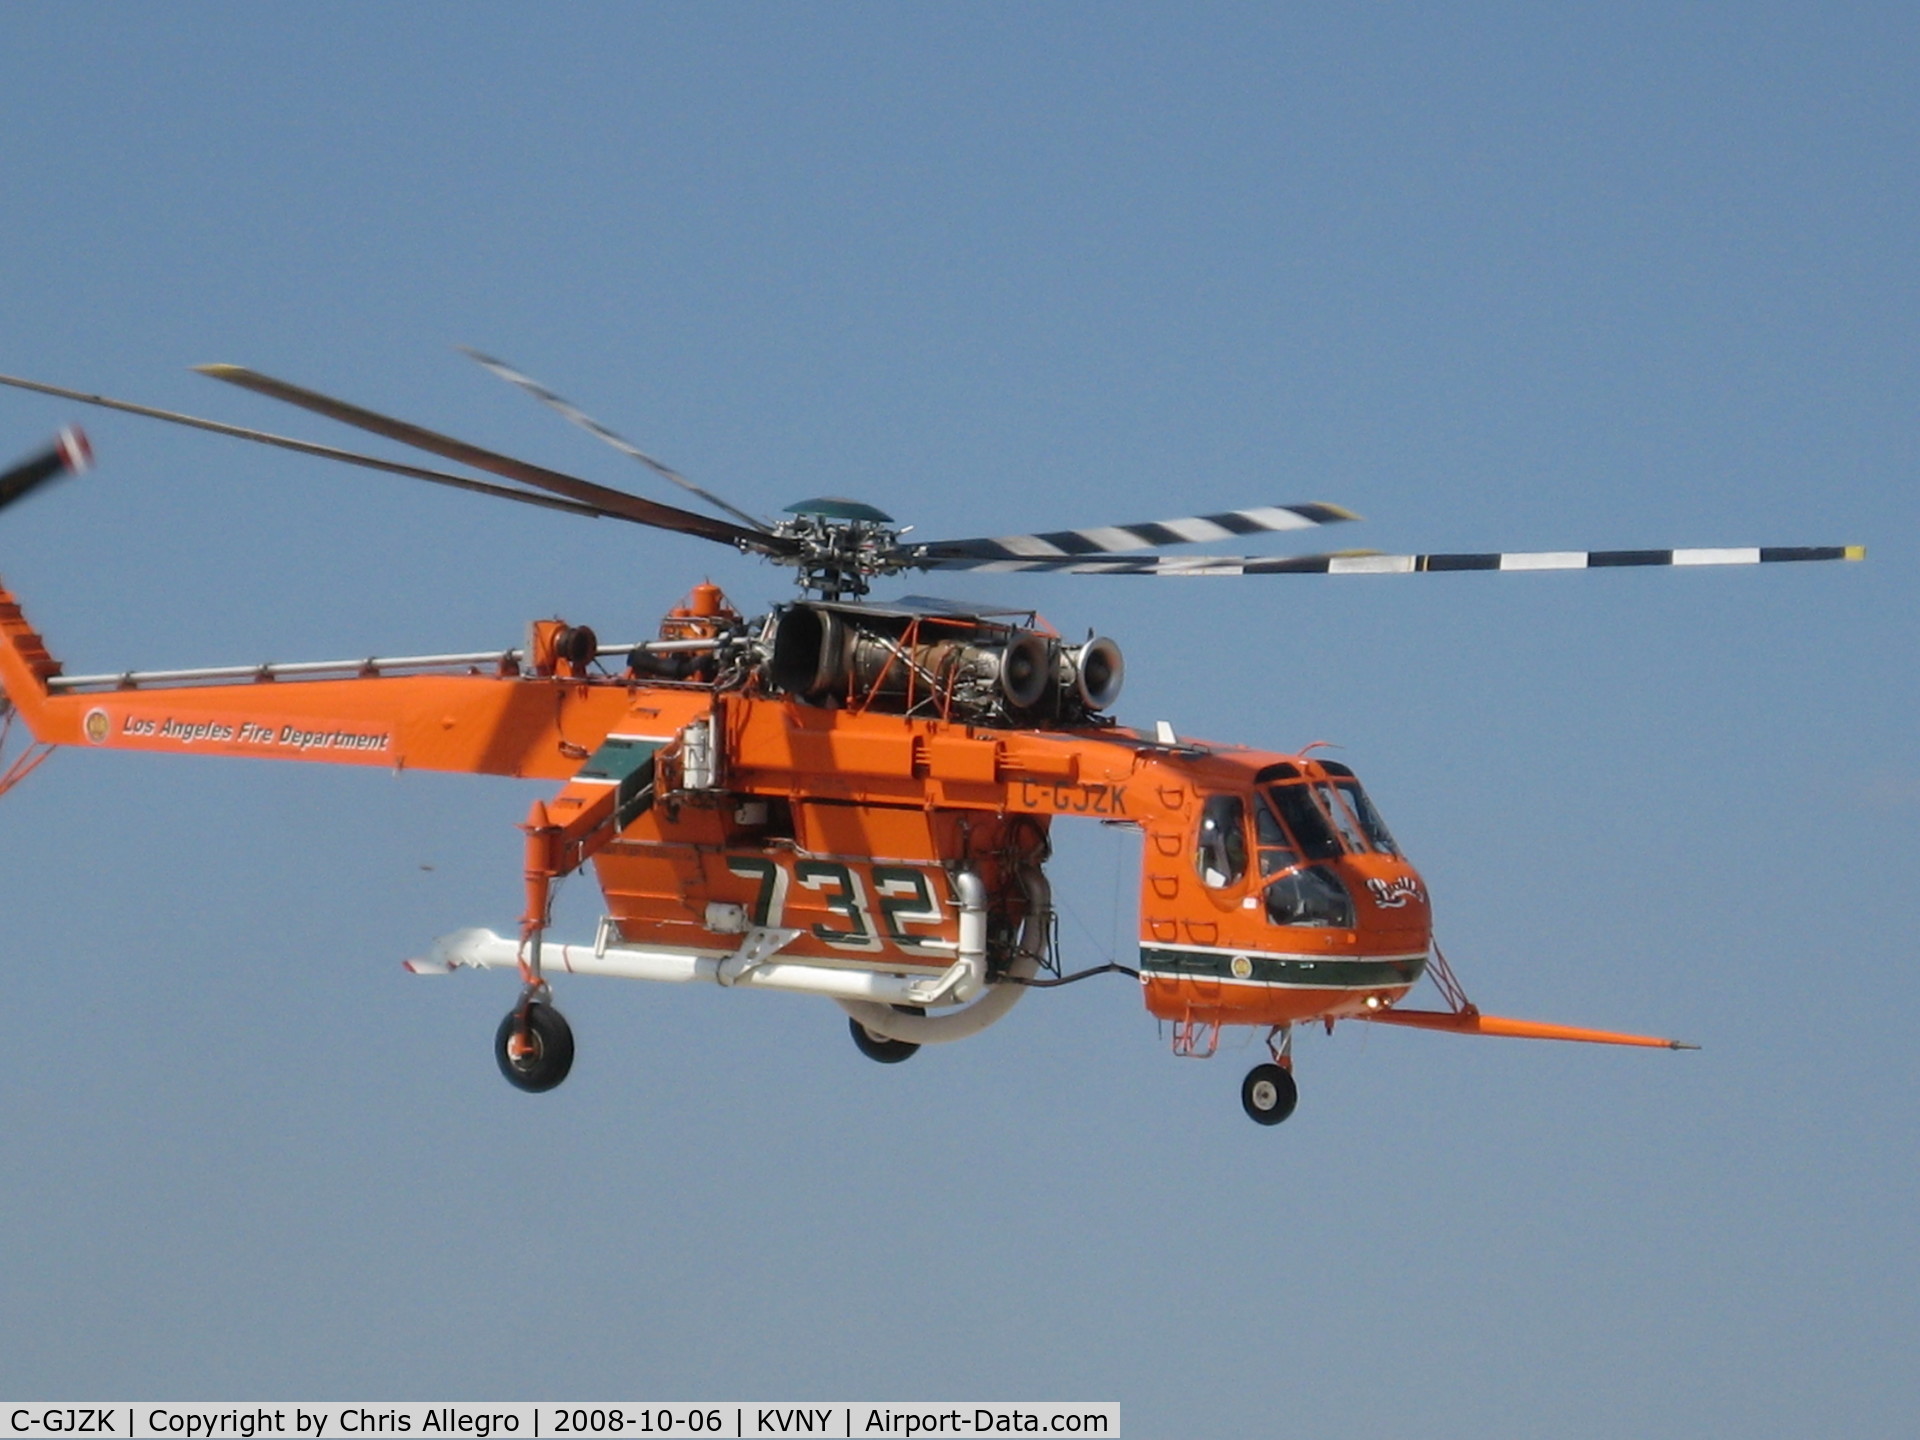 C-GJZK, 1962 Sikorsky S-64E C/N 64.003, Taking off to head over to the Sepulvada Basin Fire